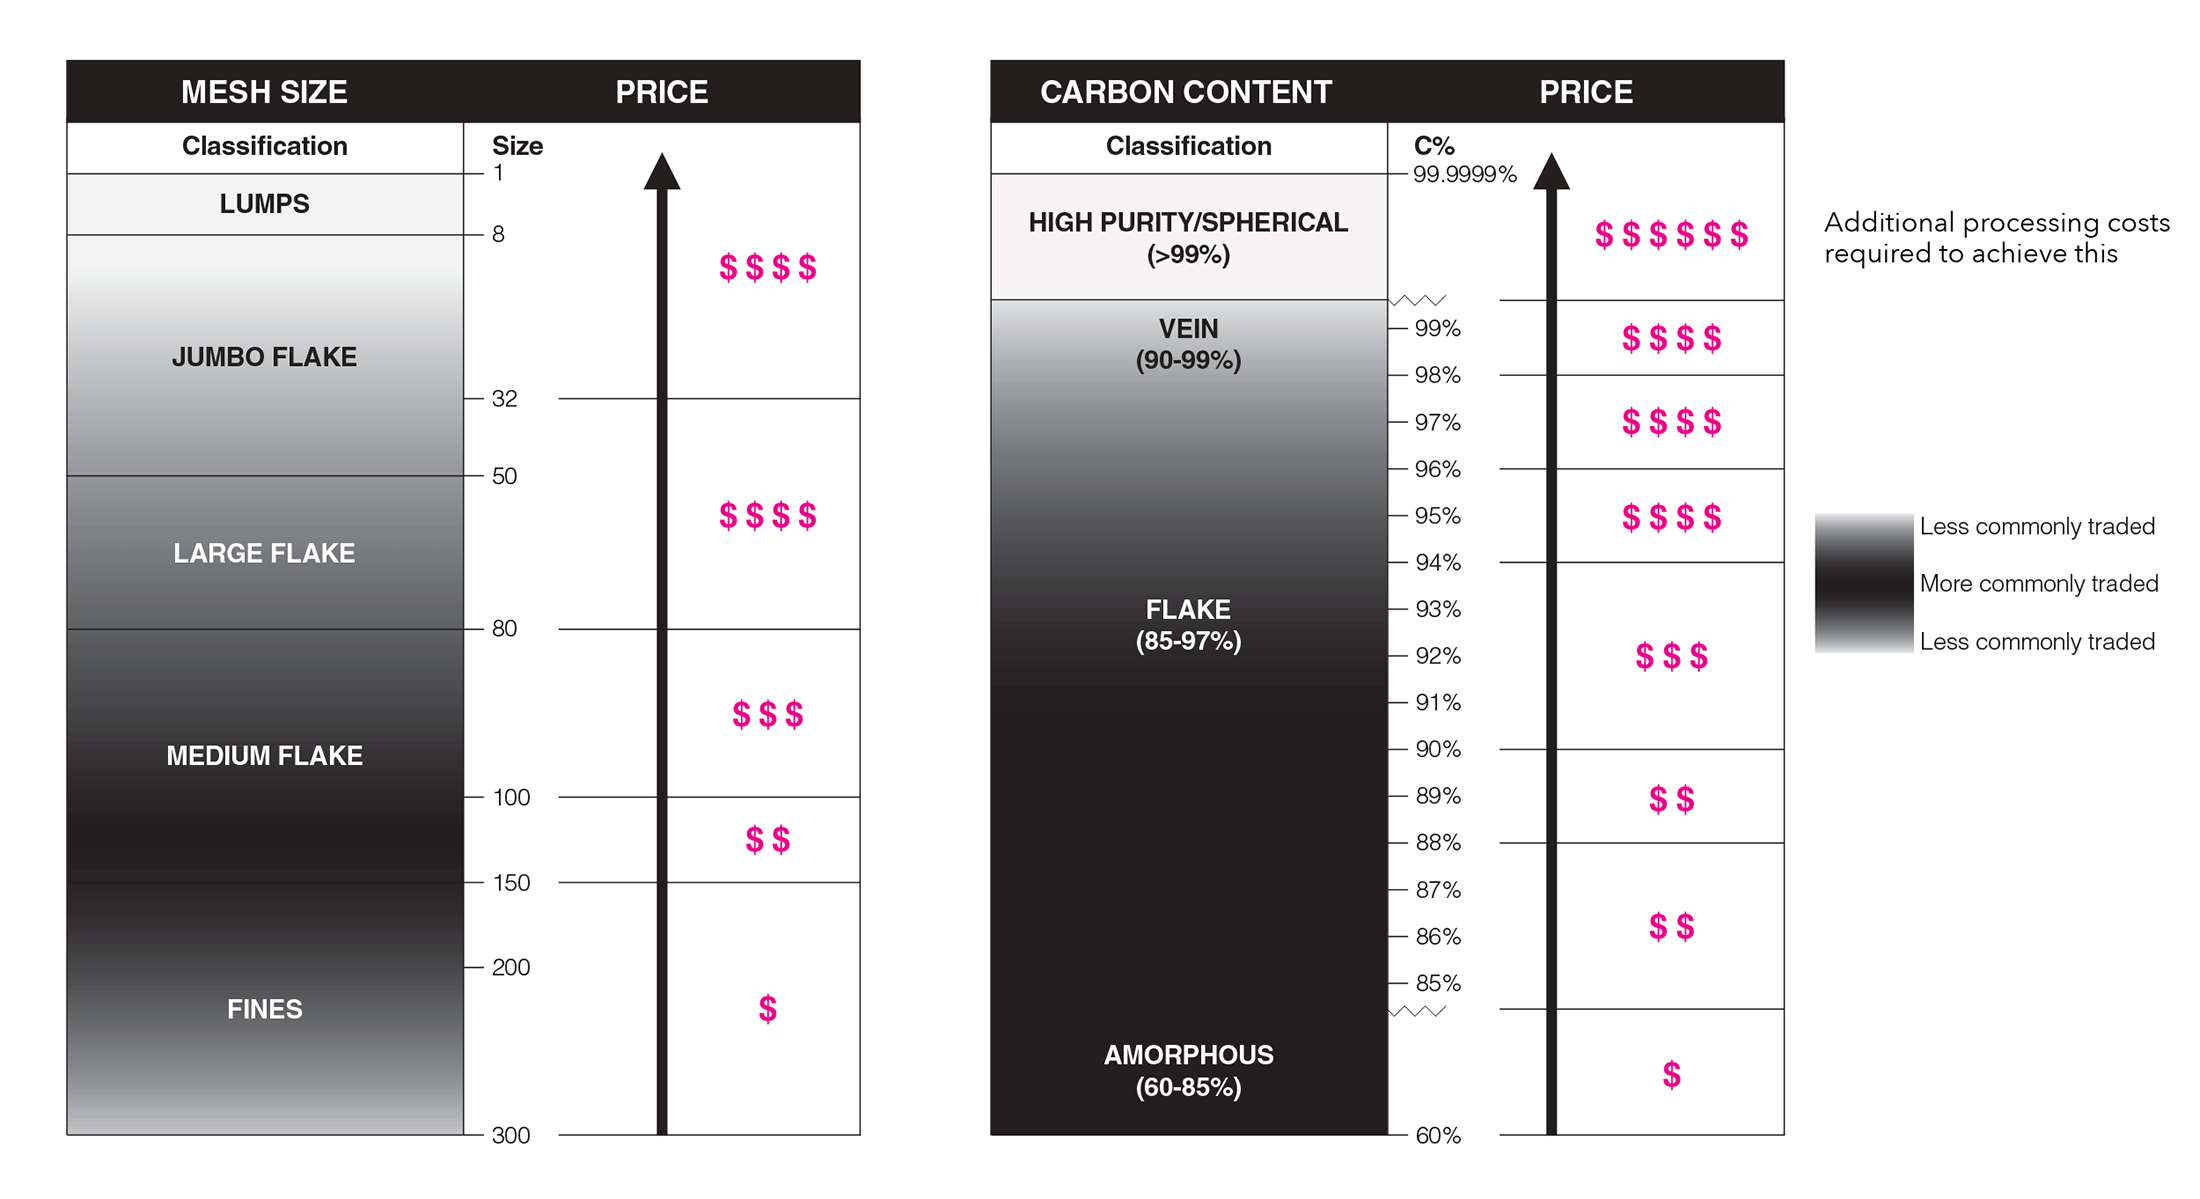 Graphite pricing easily explained